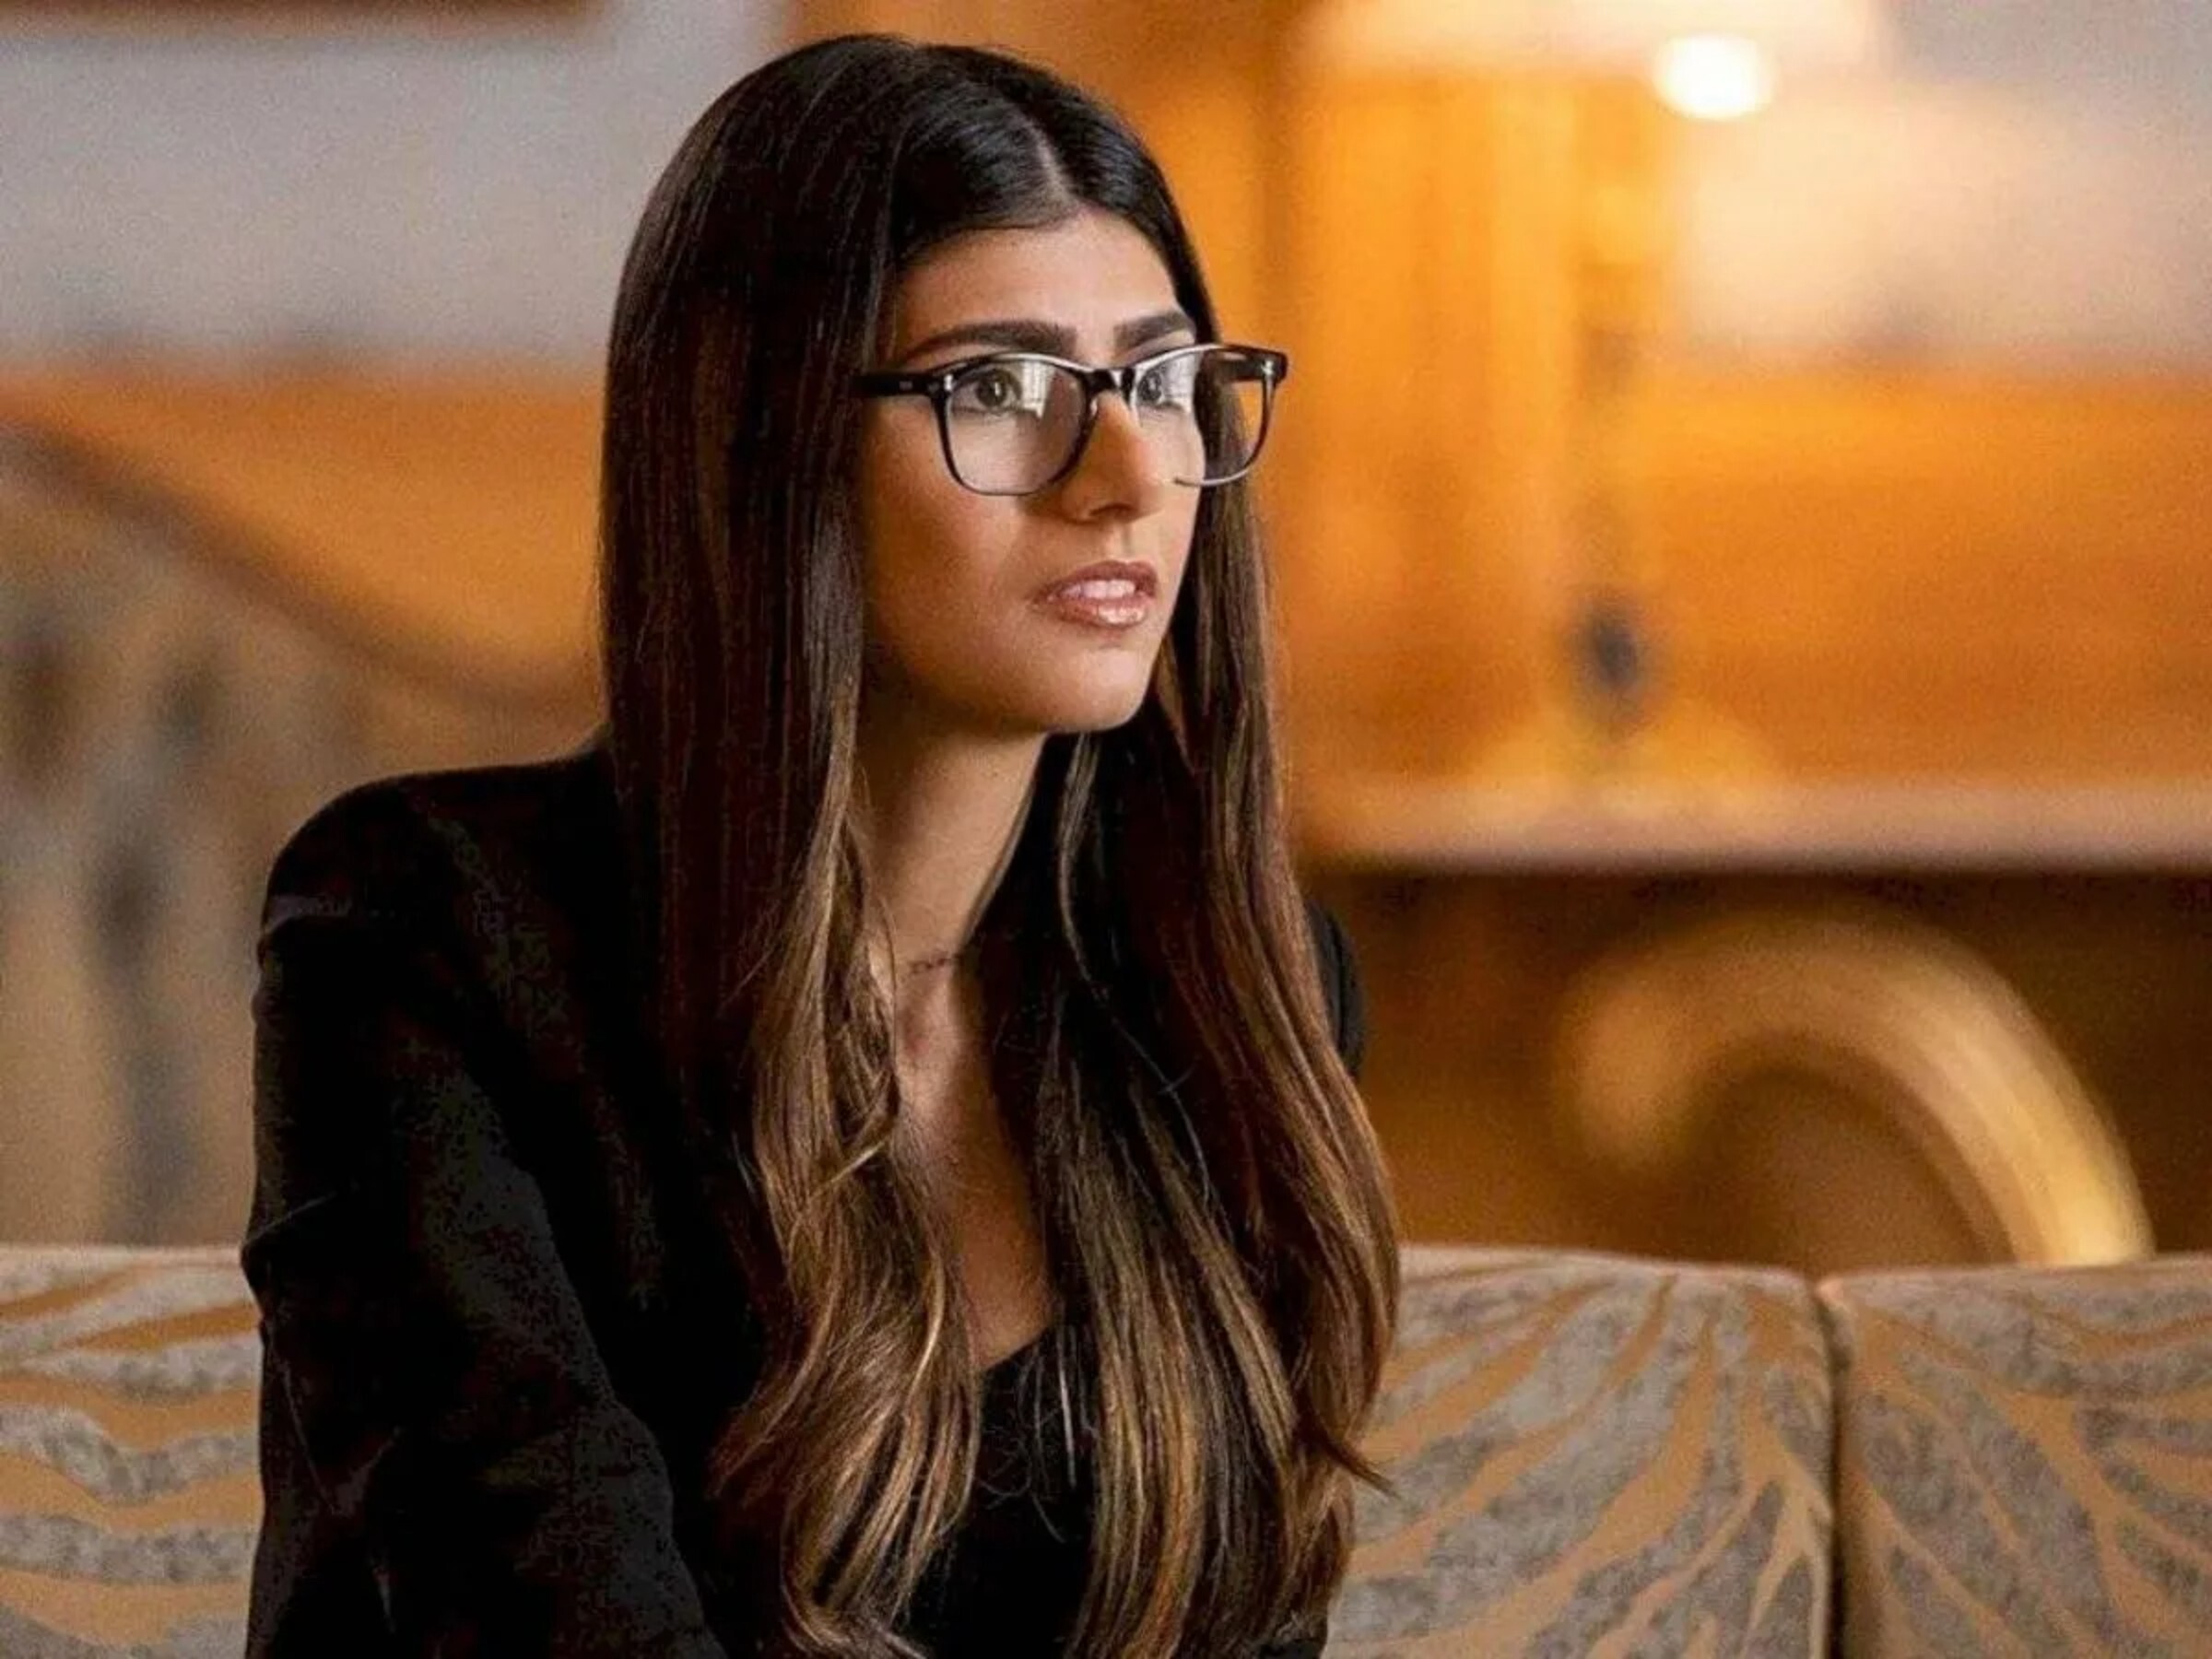 Mia Khalifa's net worth Is her OnlyFans profile hypocritical? Film Daily